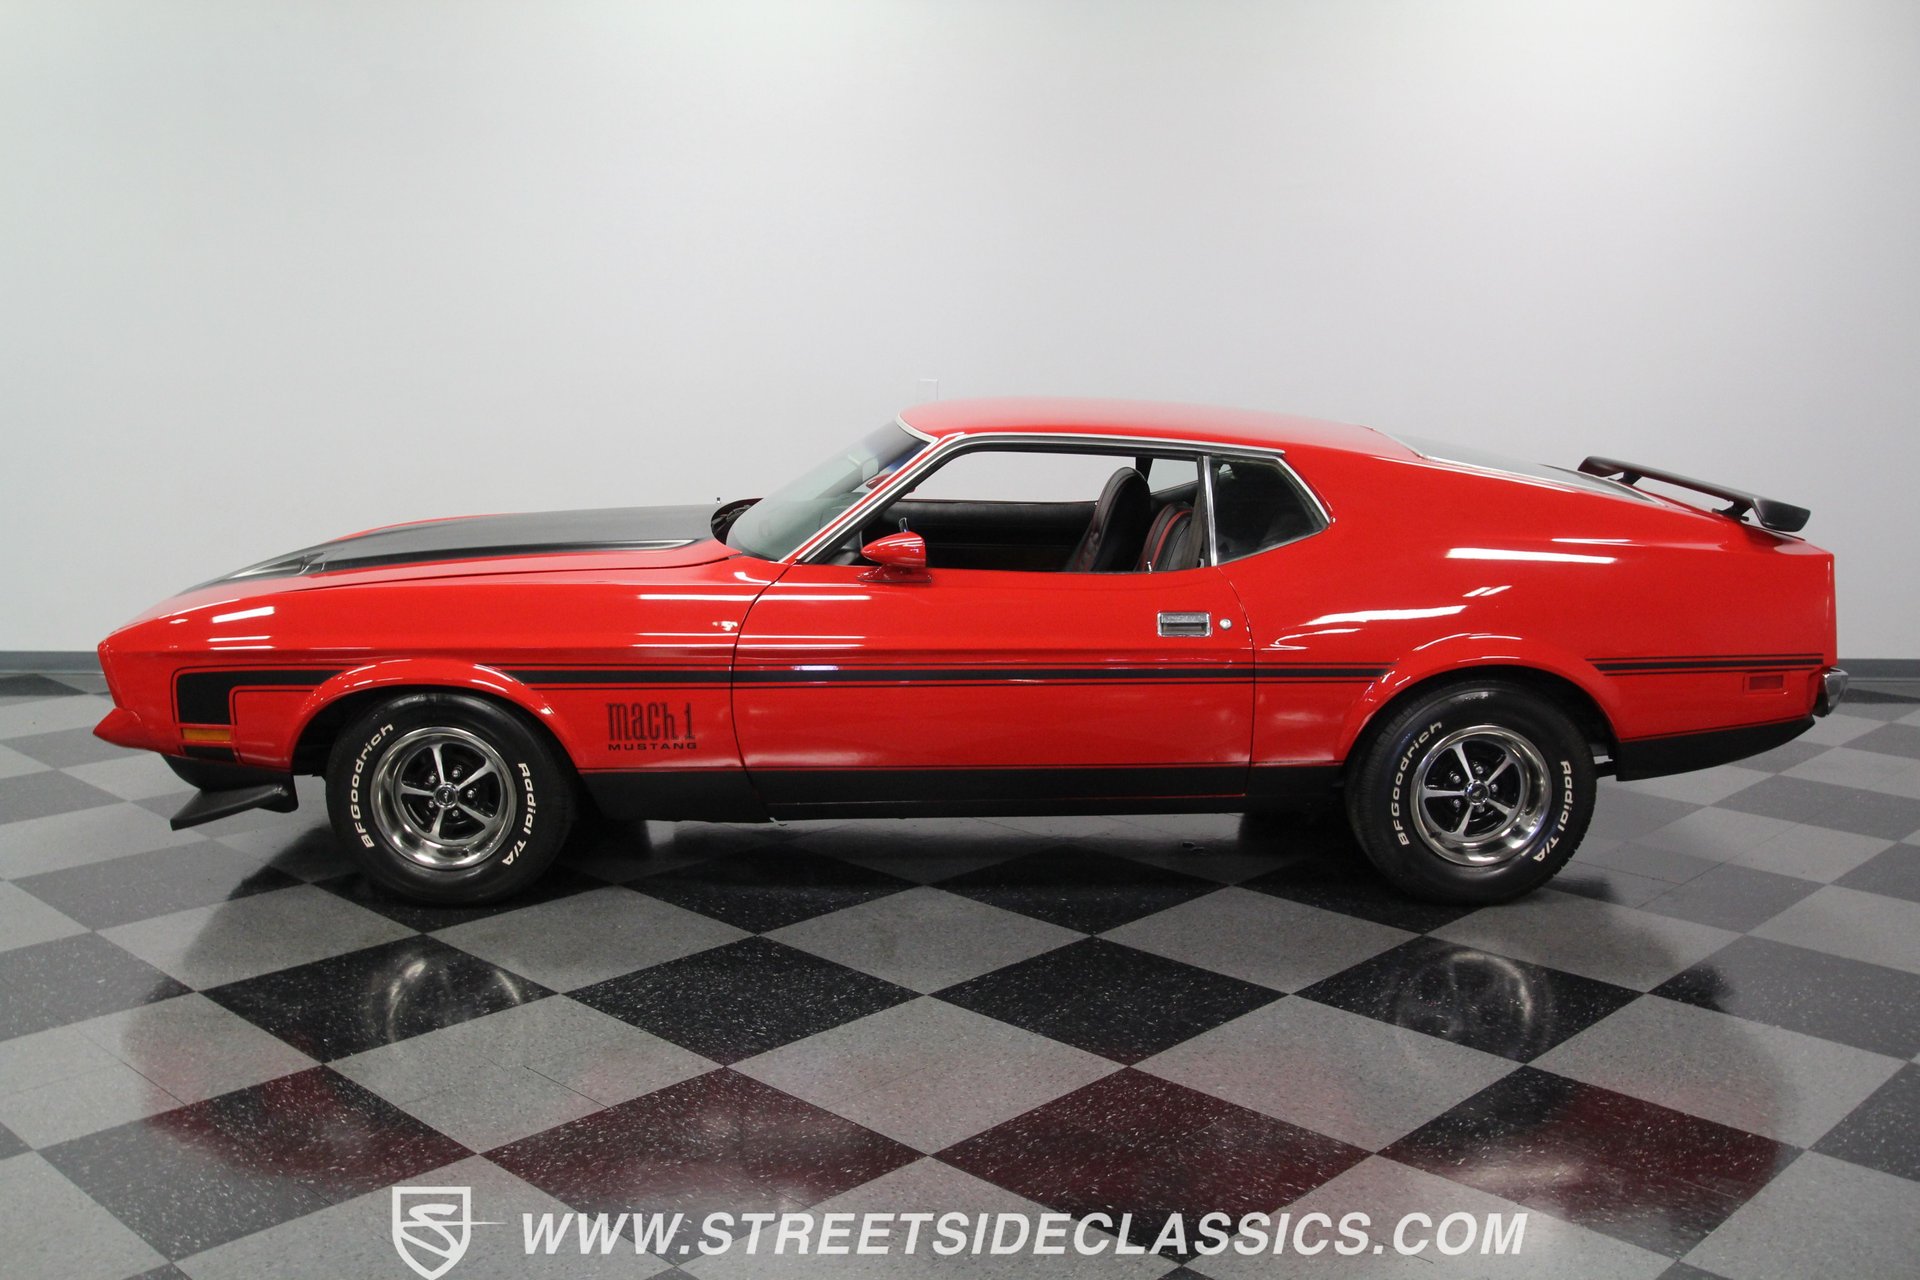 1971 Ford Mustang | Classic Cars for Sale - Streetside Classics